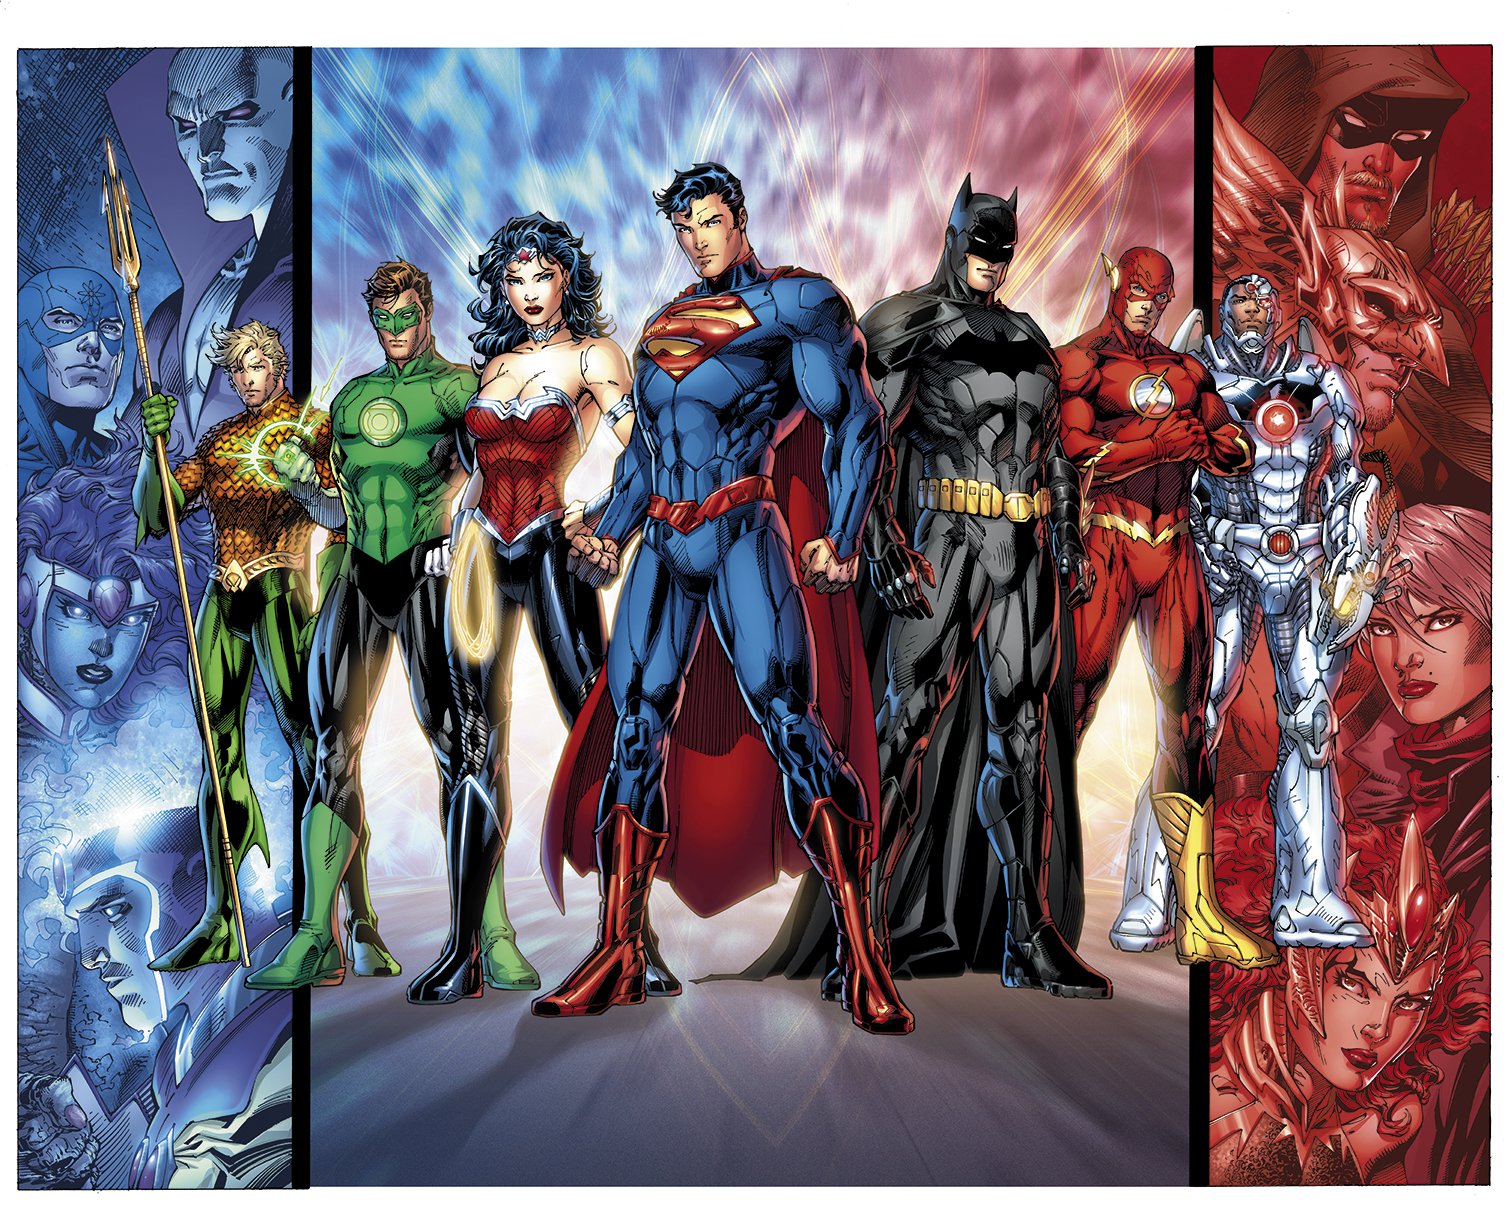 00-new-52-justice-league.jpg